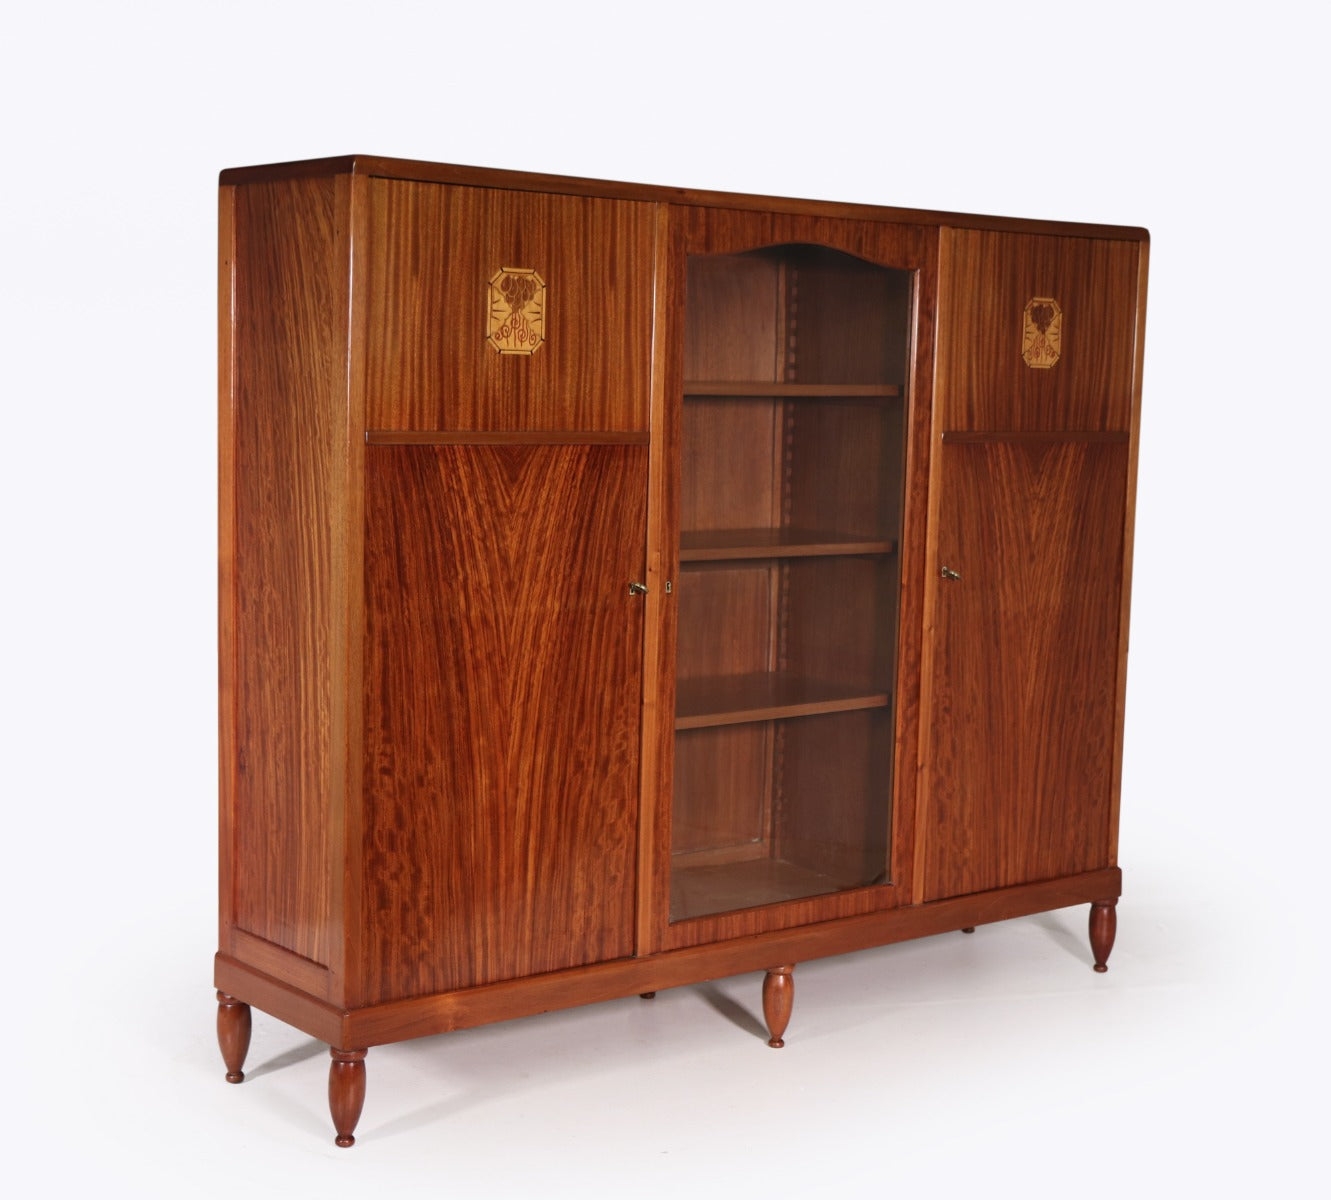 French Art Deco Library Bookcase by Dufrene – The Furniture Rooms